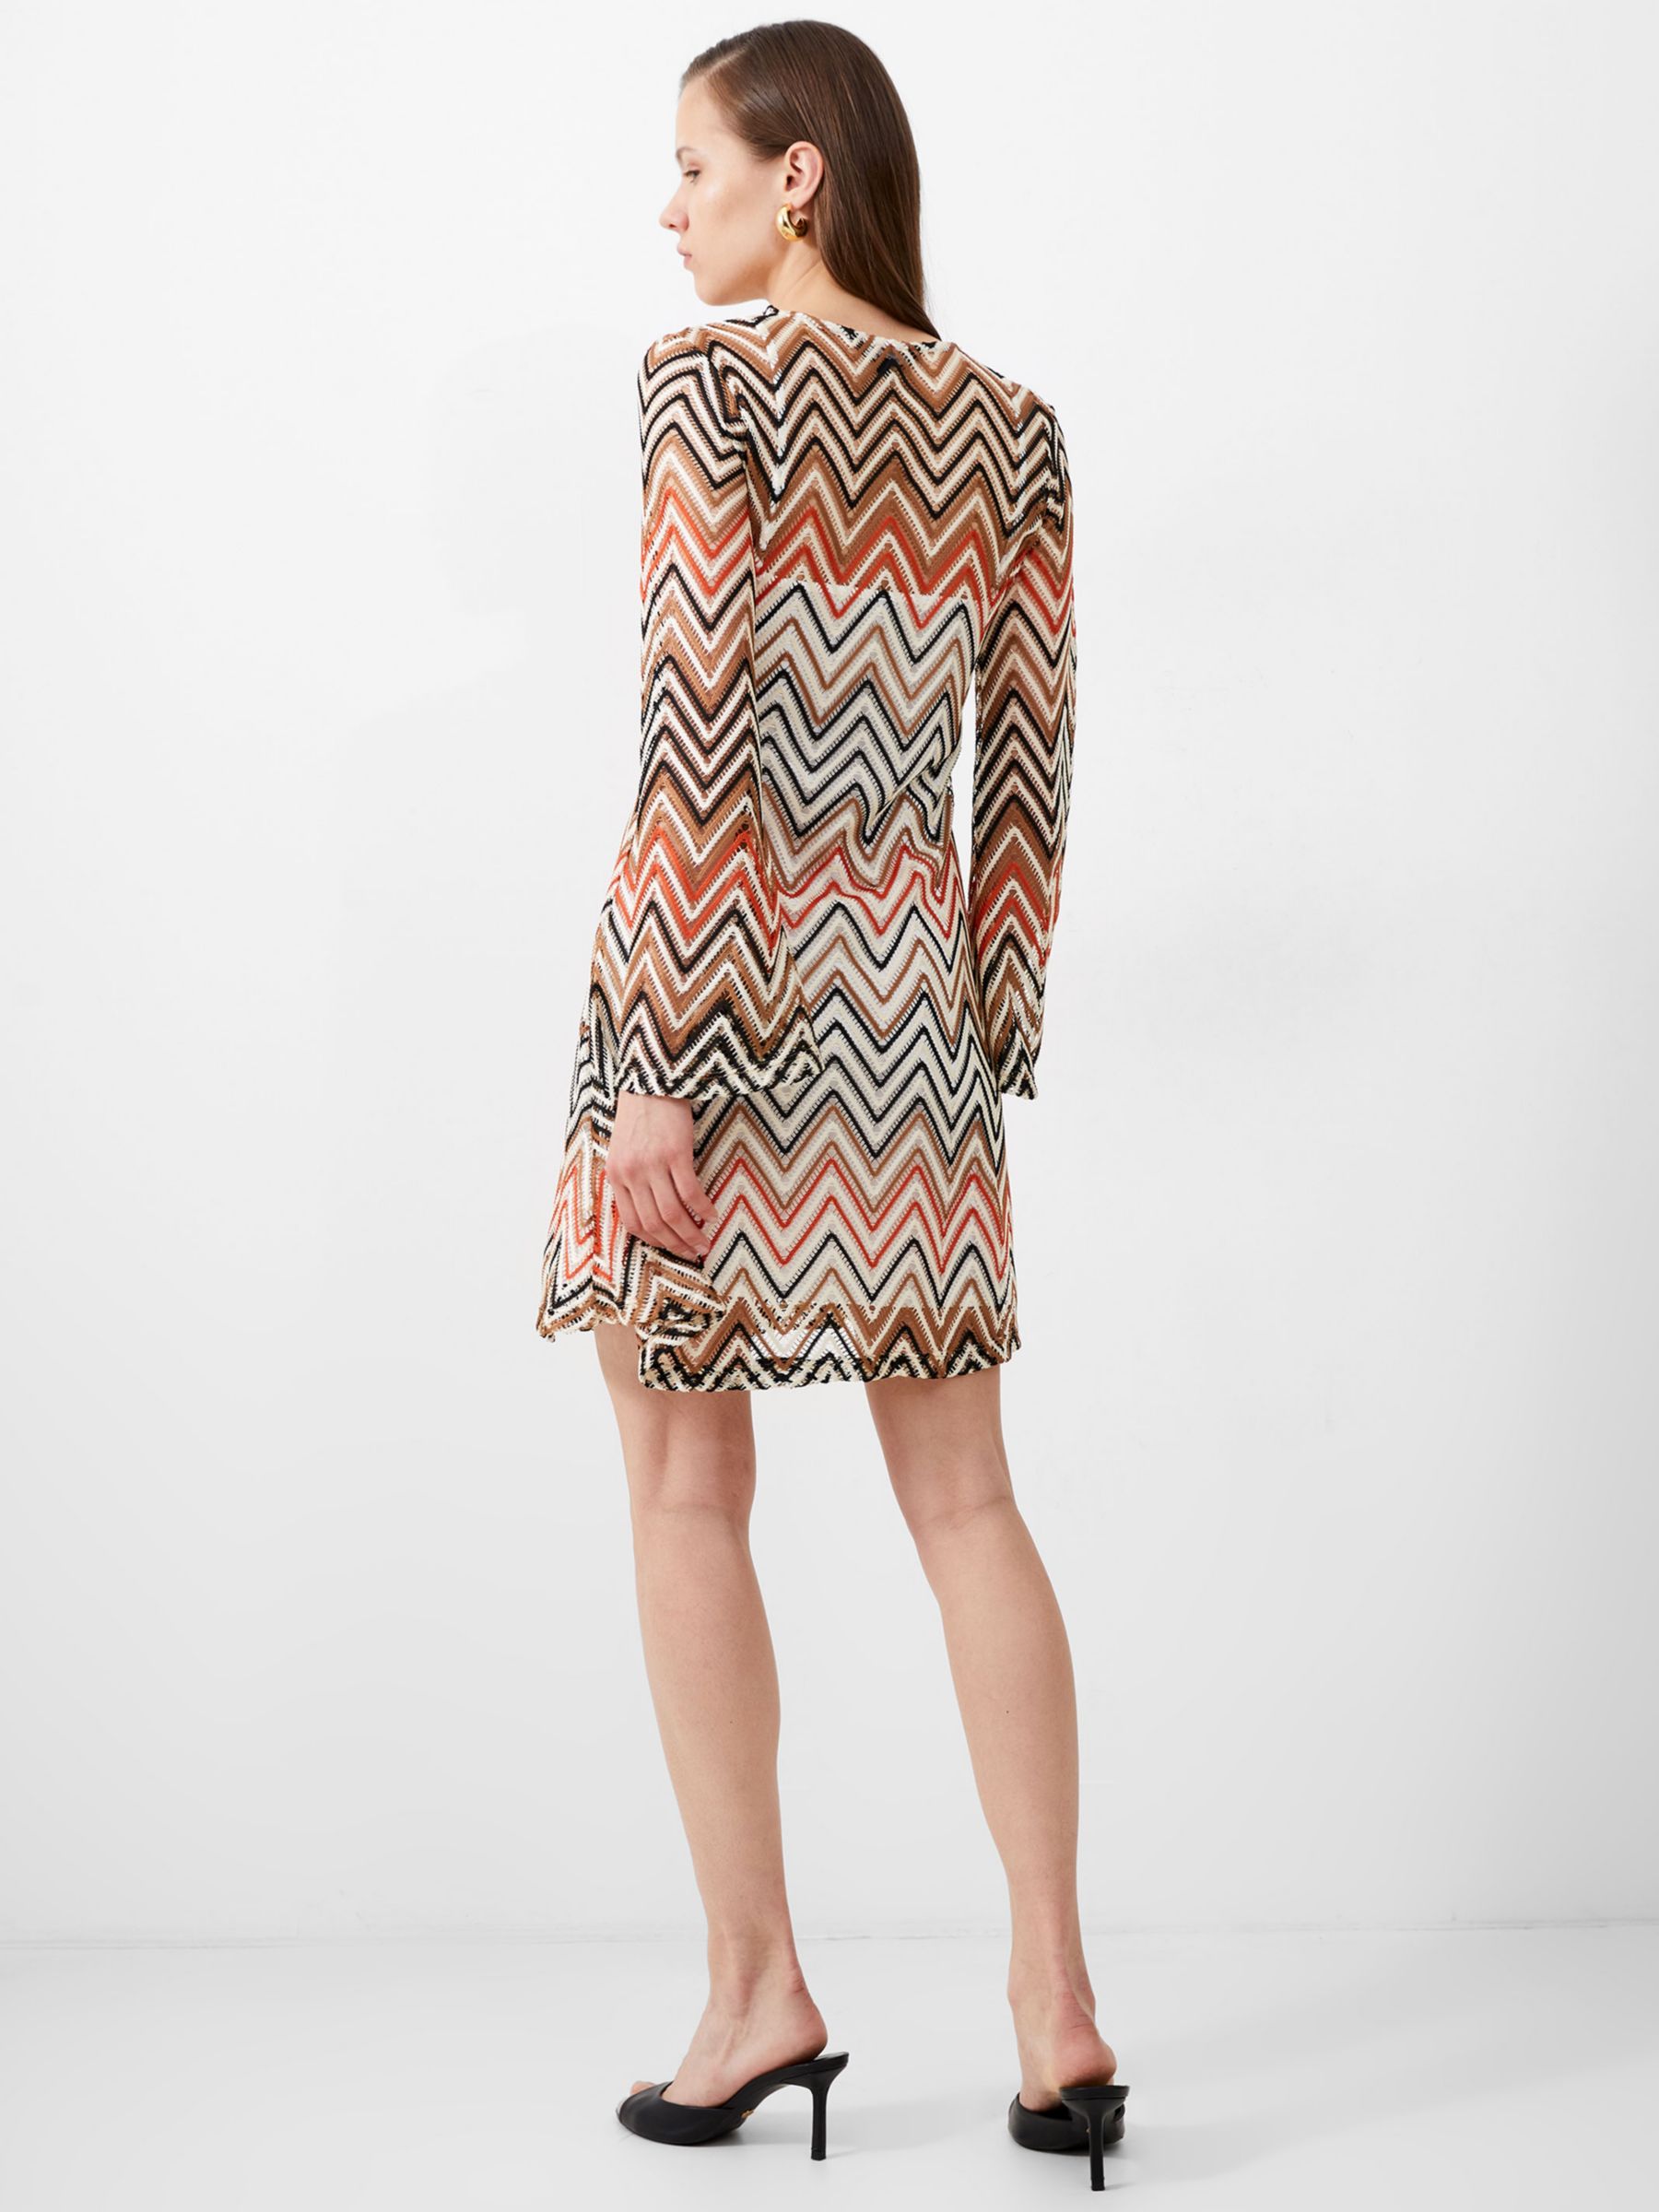 Buy French Connection Rudy Textured Zig Zag Stripe Mini Dress, Pear/Multi Online at johnlewis.com